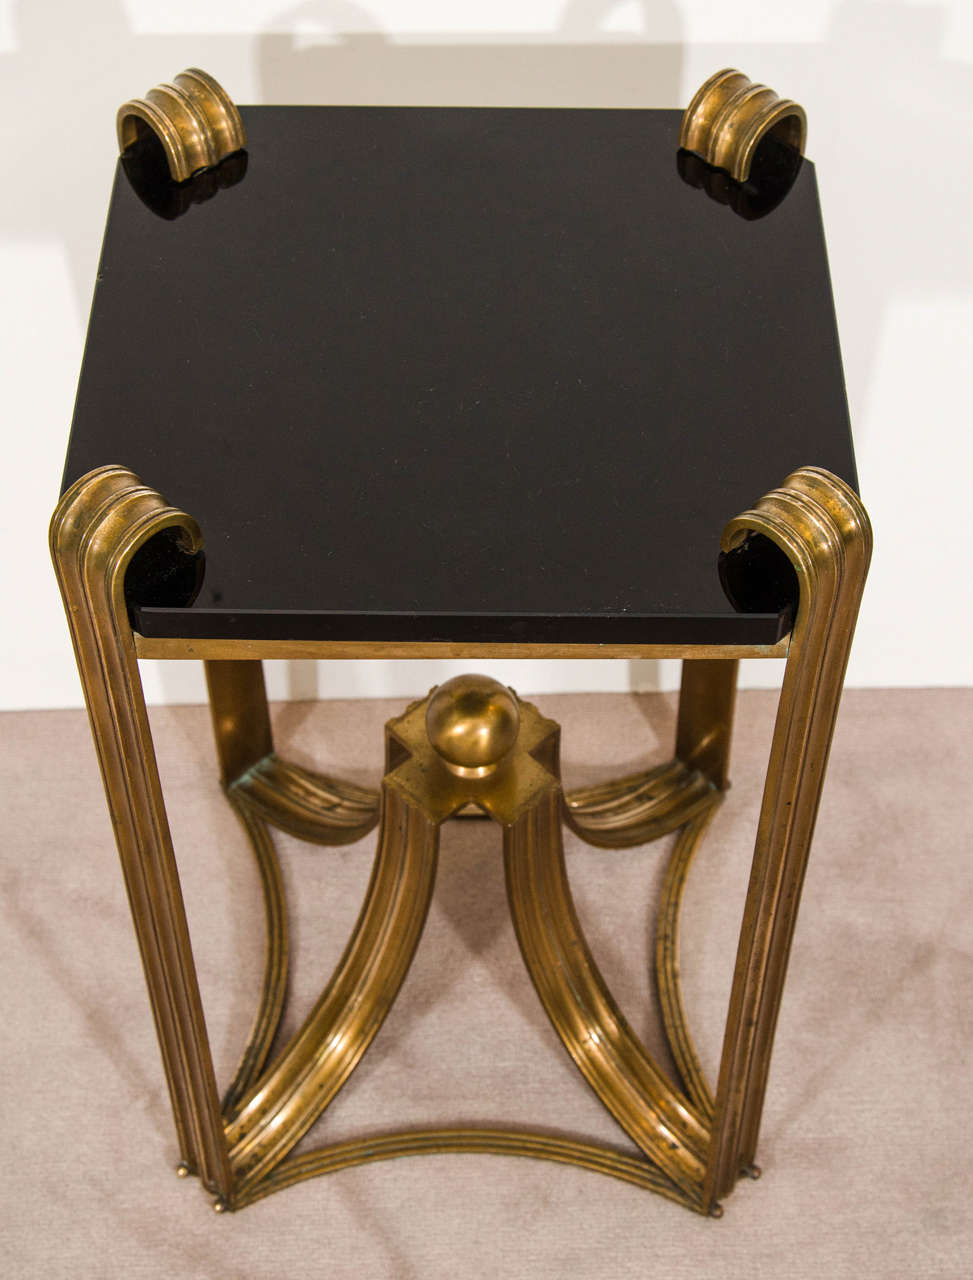 20th Century Art Deco Moderne Pair of Rare Bronze Side Tables For Sale